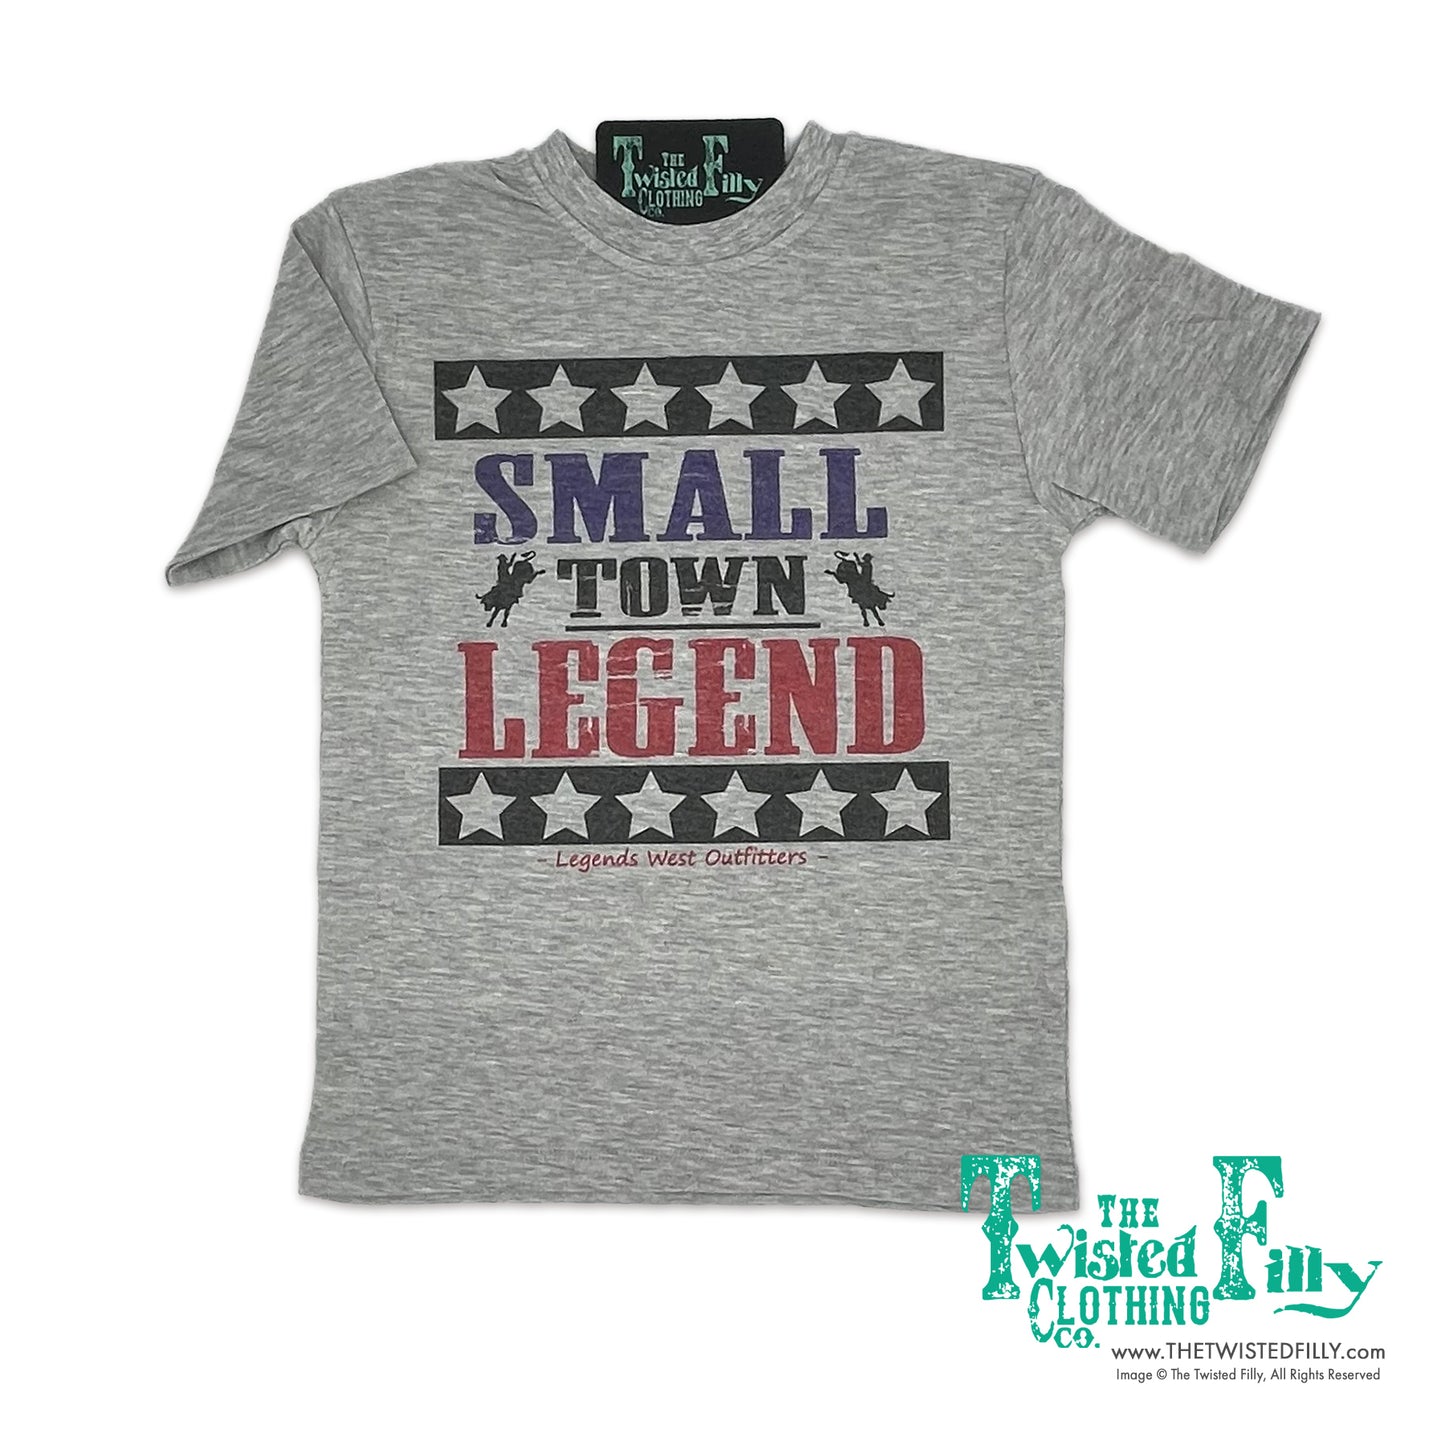 Small Town Legend - S/S Infant Tee - Gray